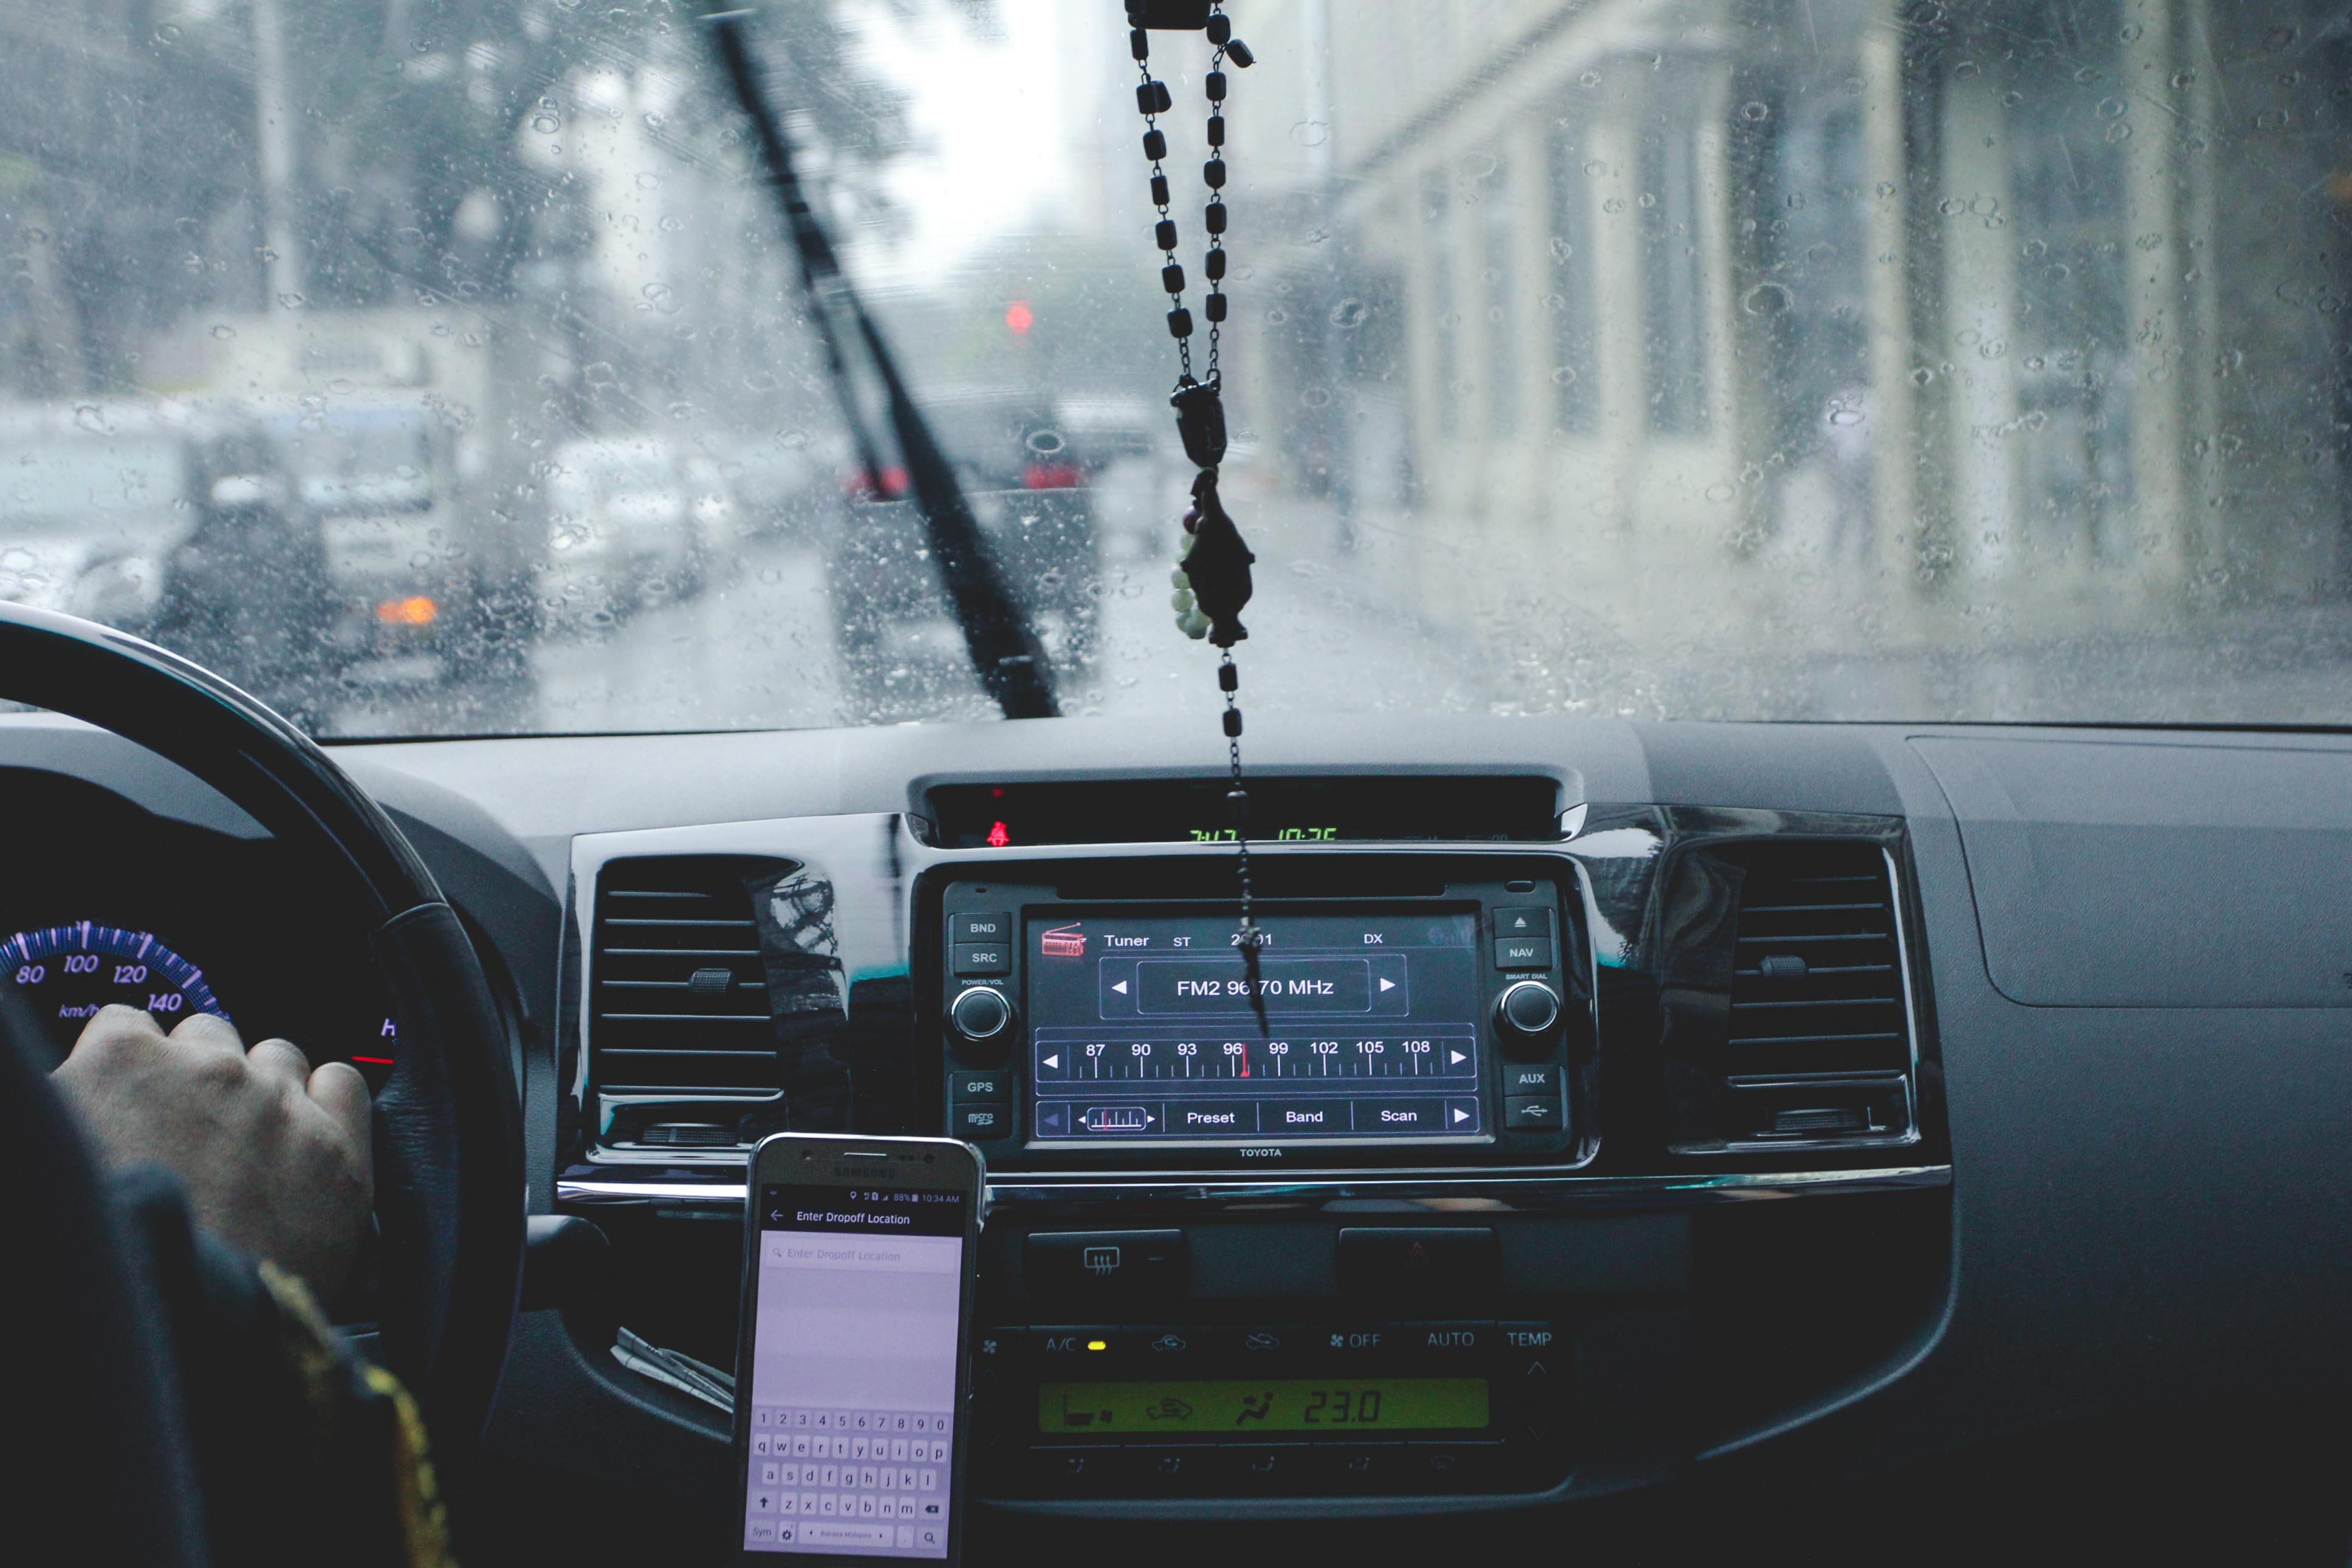 SYNCING YOUR PHONE TO YOUR CAR CAN PUT YOU AT RISK